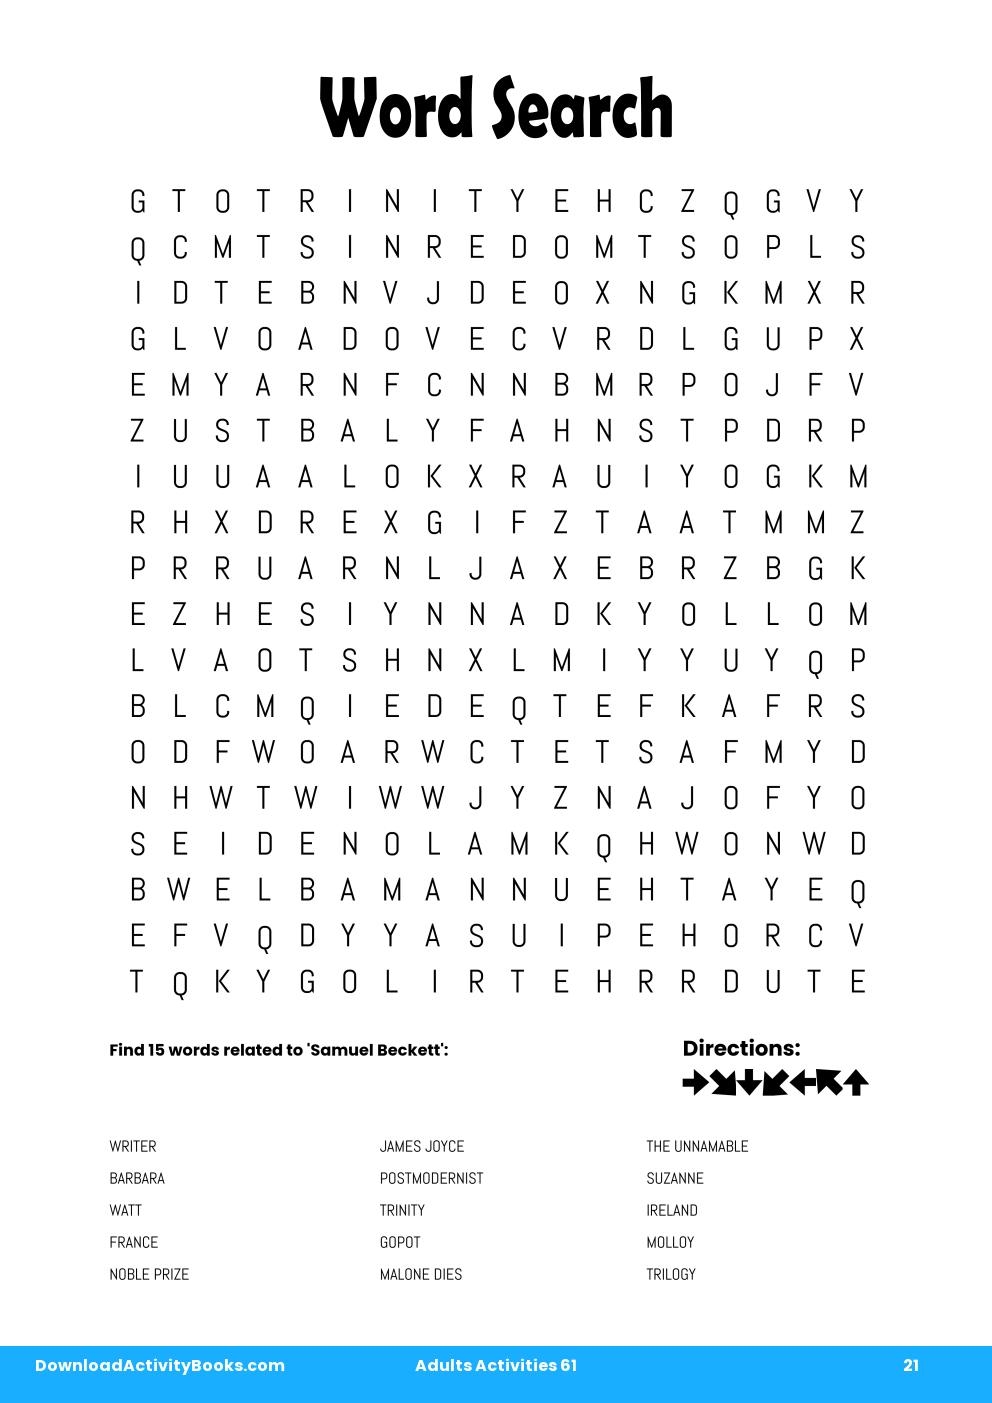 Word Search in Adults Activities 61